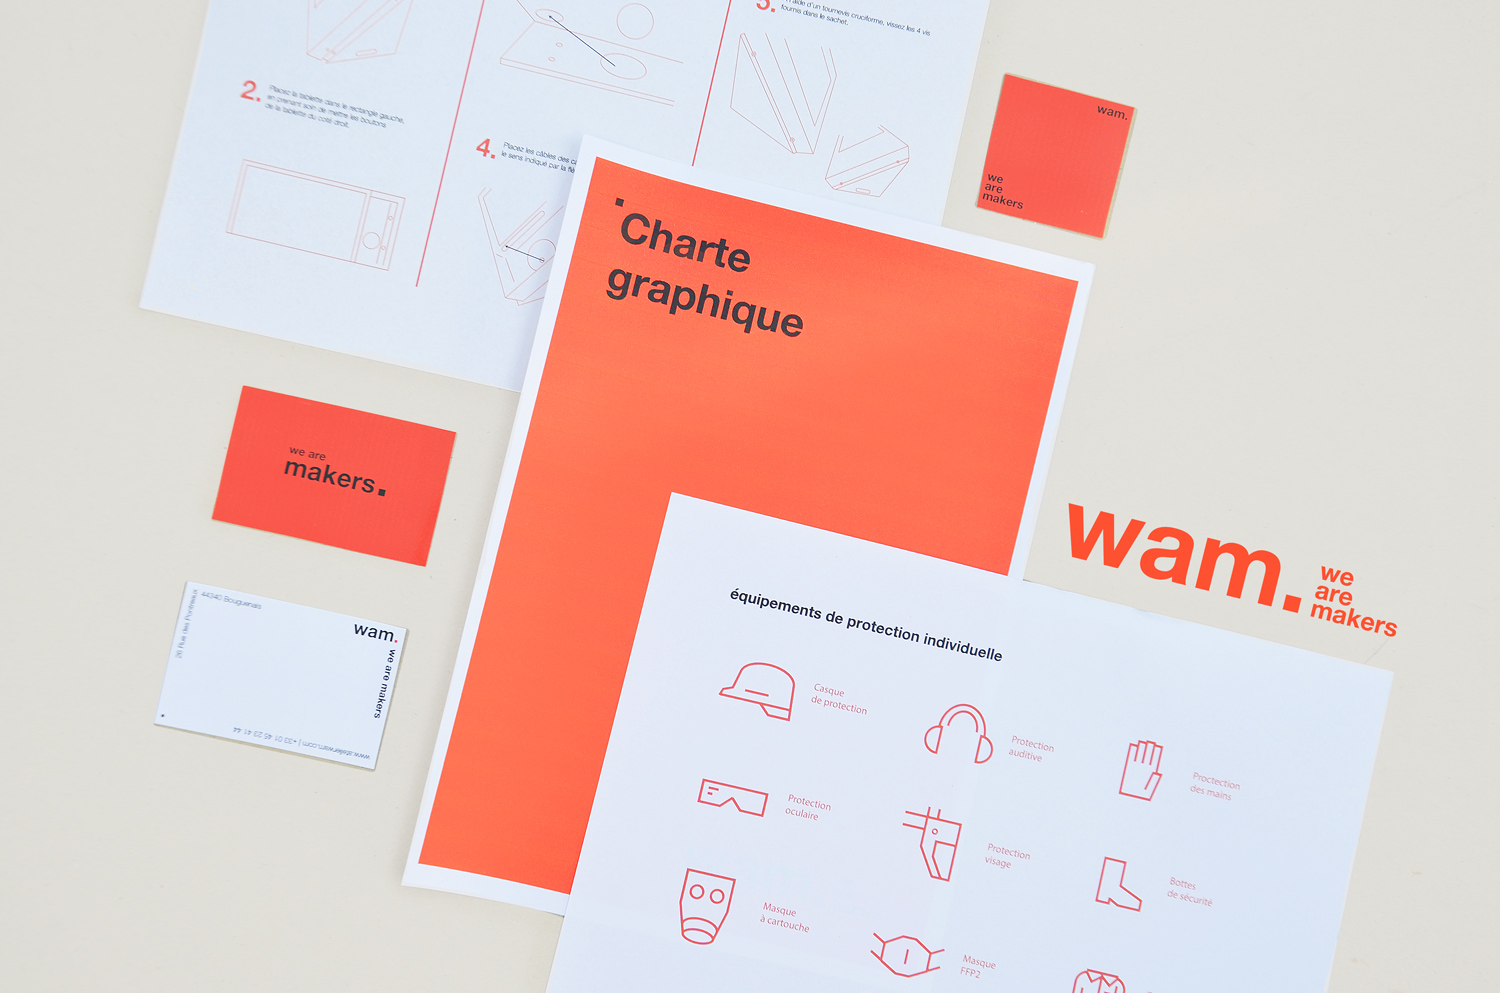 Kinga Klisz portfolio. Visual identity for workshop, atelier in inclusive design. As a color for brand identification I used vivid orange which refers to creativity, communication, artisanal work and positive energy.